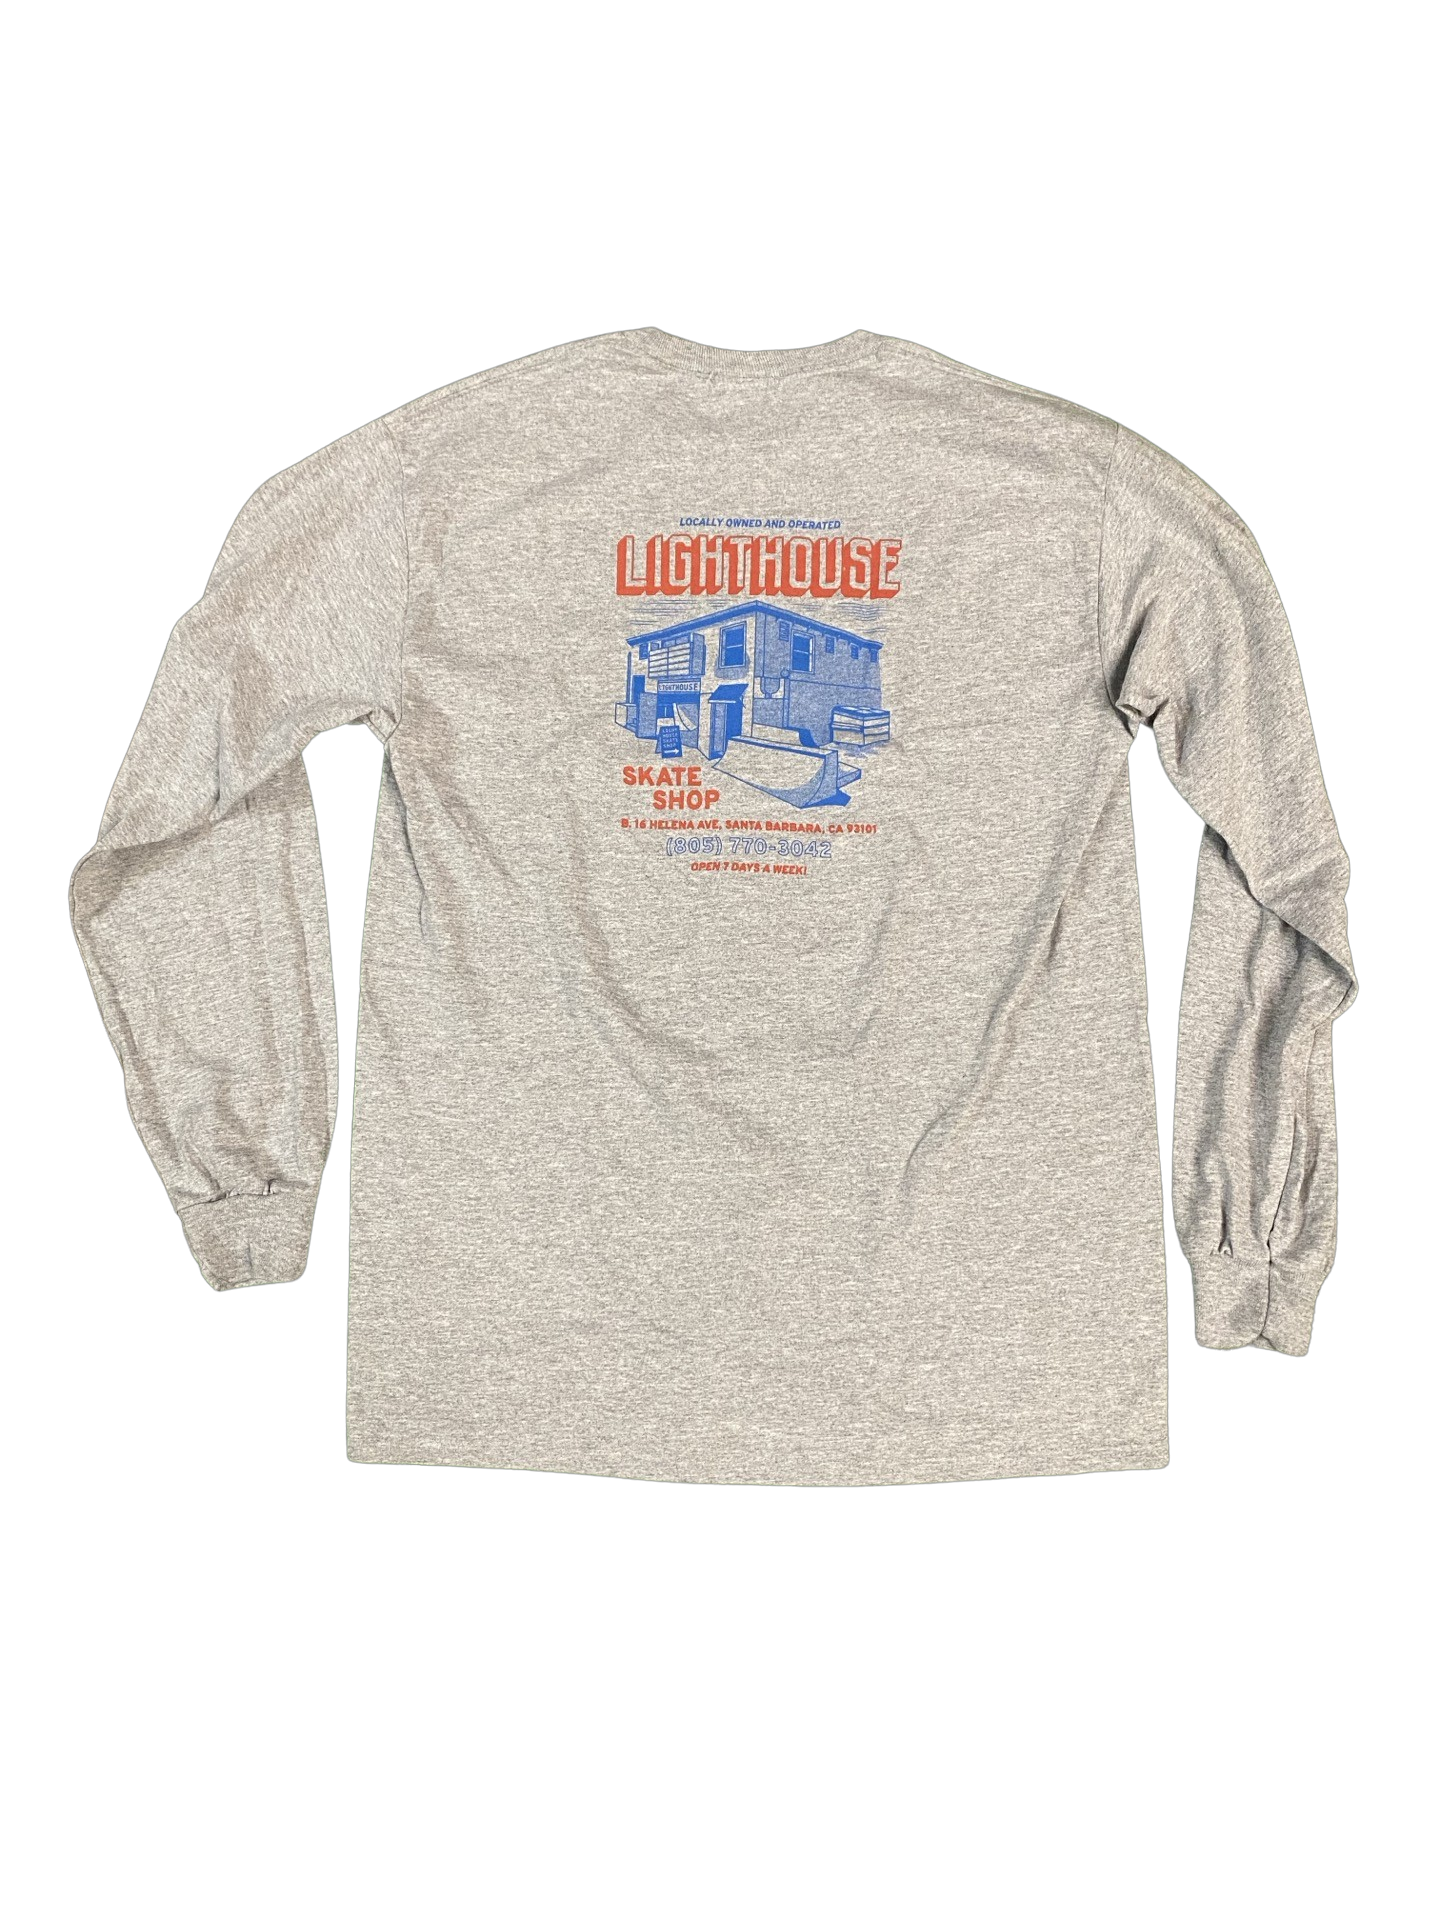 Lighthouse Store Front Long Sleeve Shirt